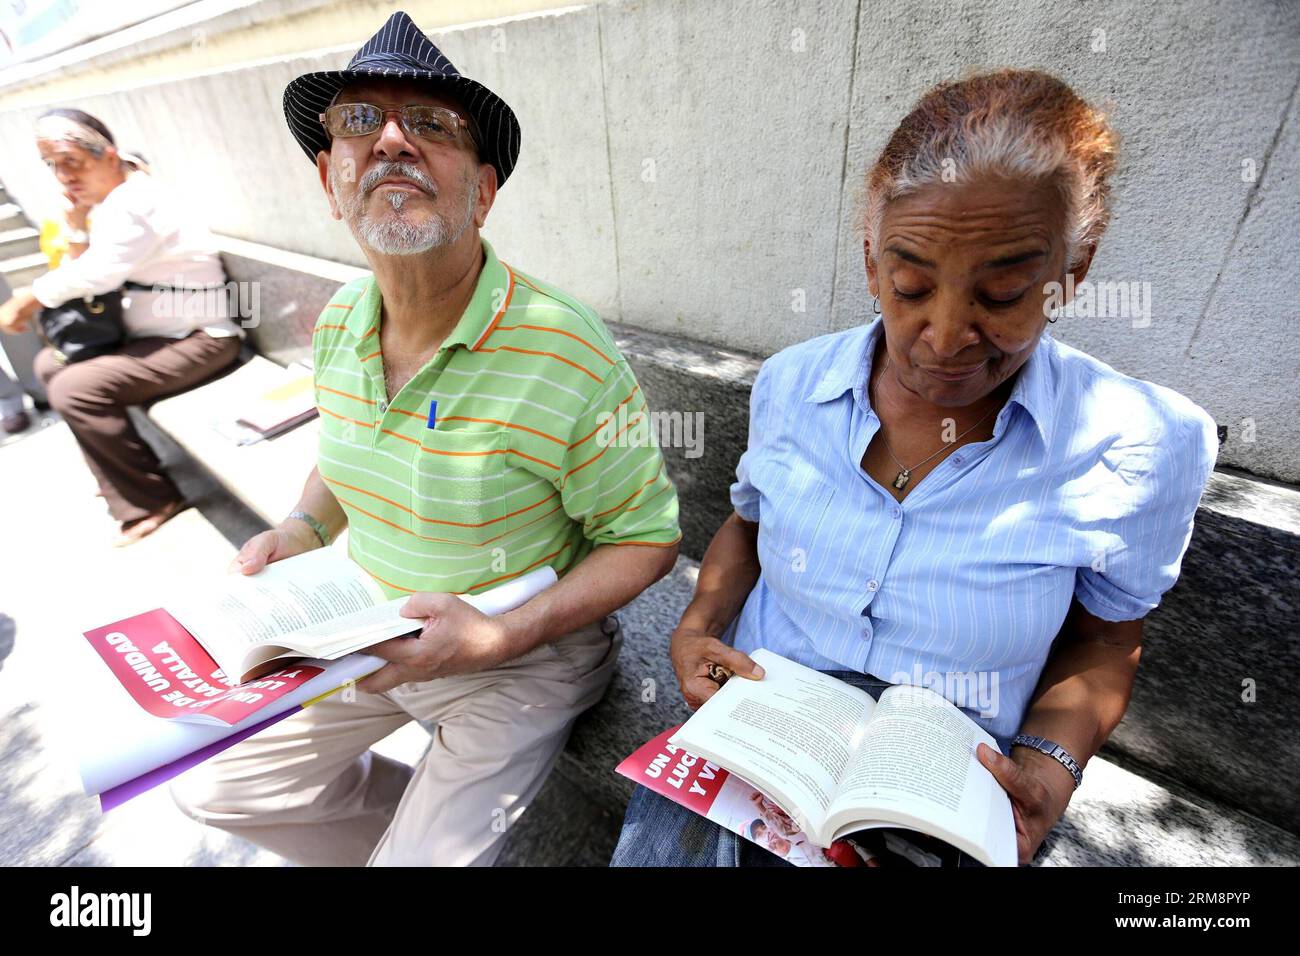 CARACAS, April 23, 2014 (Xinhua) -- People read books at Bolivar Square in Caracas, Venezuela, on April 23, 2014. The World Book Day is commemorated on Wednesday. (Xinhua/Zurimar Campos/AVN) (dzl) VENEZUELA-CARACAS-CULTURE-BOOK DAY PUBLICATIONxNOTxINxCHN   Caracas April 23 2014 XINHUA Celebrities Read Books AT Bolivar Square in Caracas Venezuela ON April 23 2014 The World Book Day IS commemorated ON Wednesday XINHUA  Campos  dzl Venezuela Caracas Culture Book Day PUBLICATIONxNOTxINxCHN Stock Photo